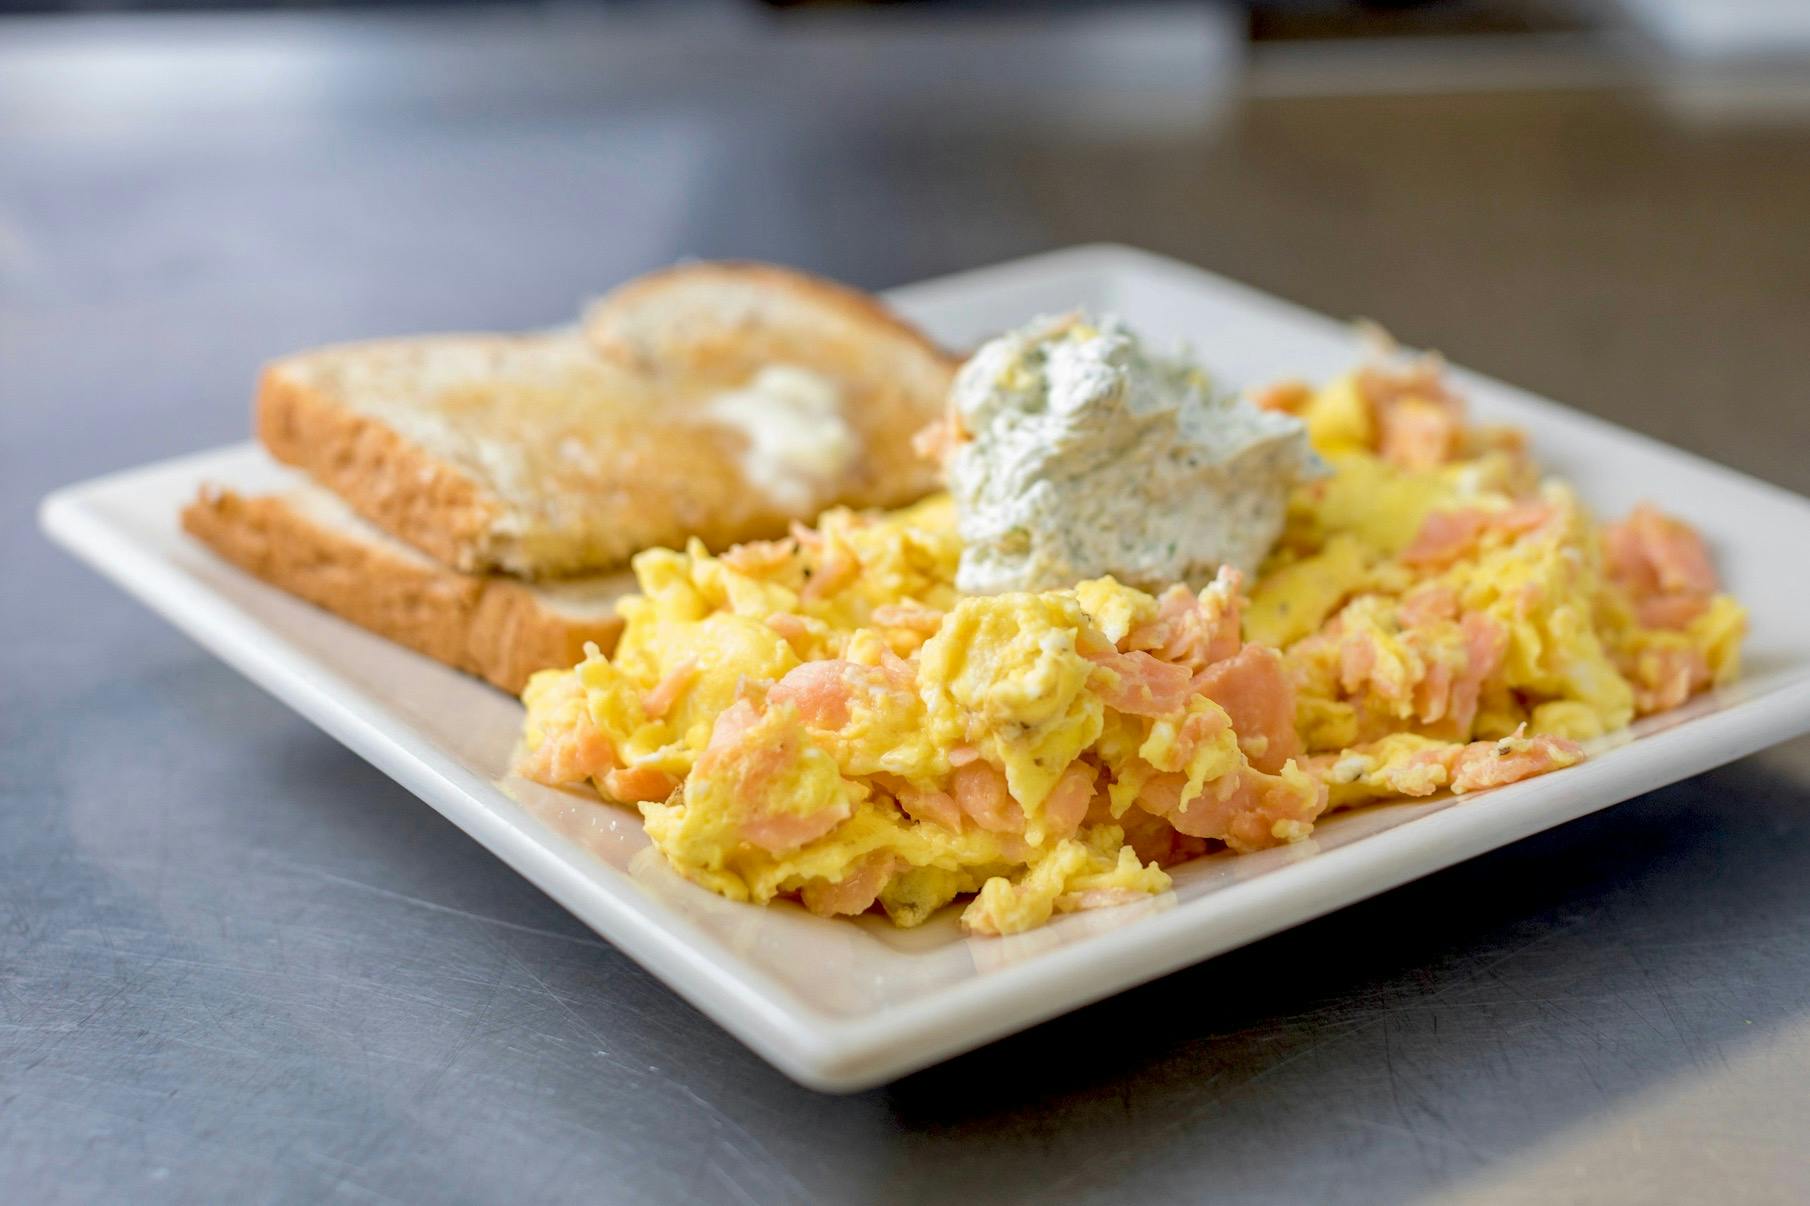 Smoked Salmon Scramble from The French Press in Eau Claire, WI